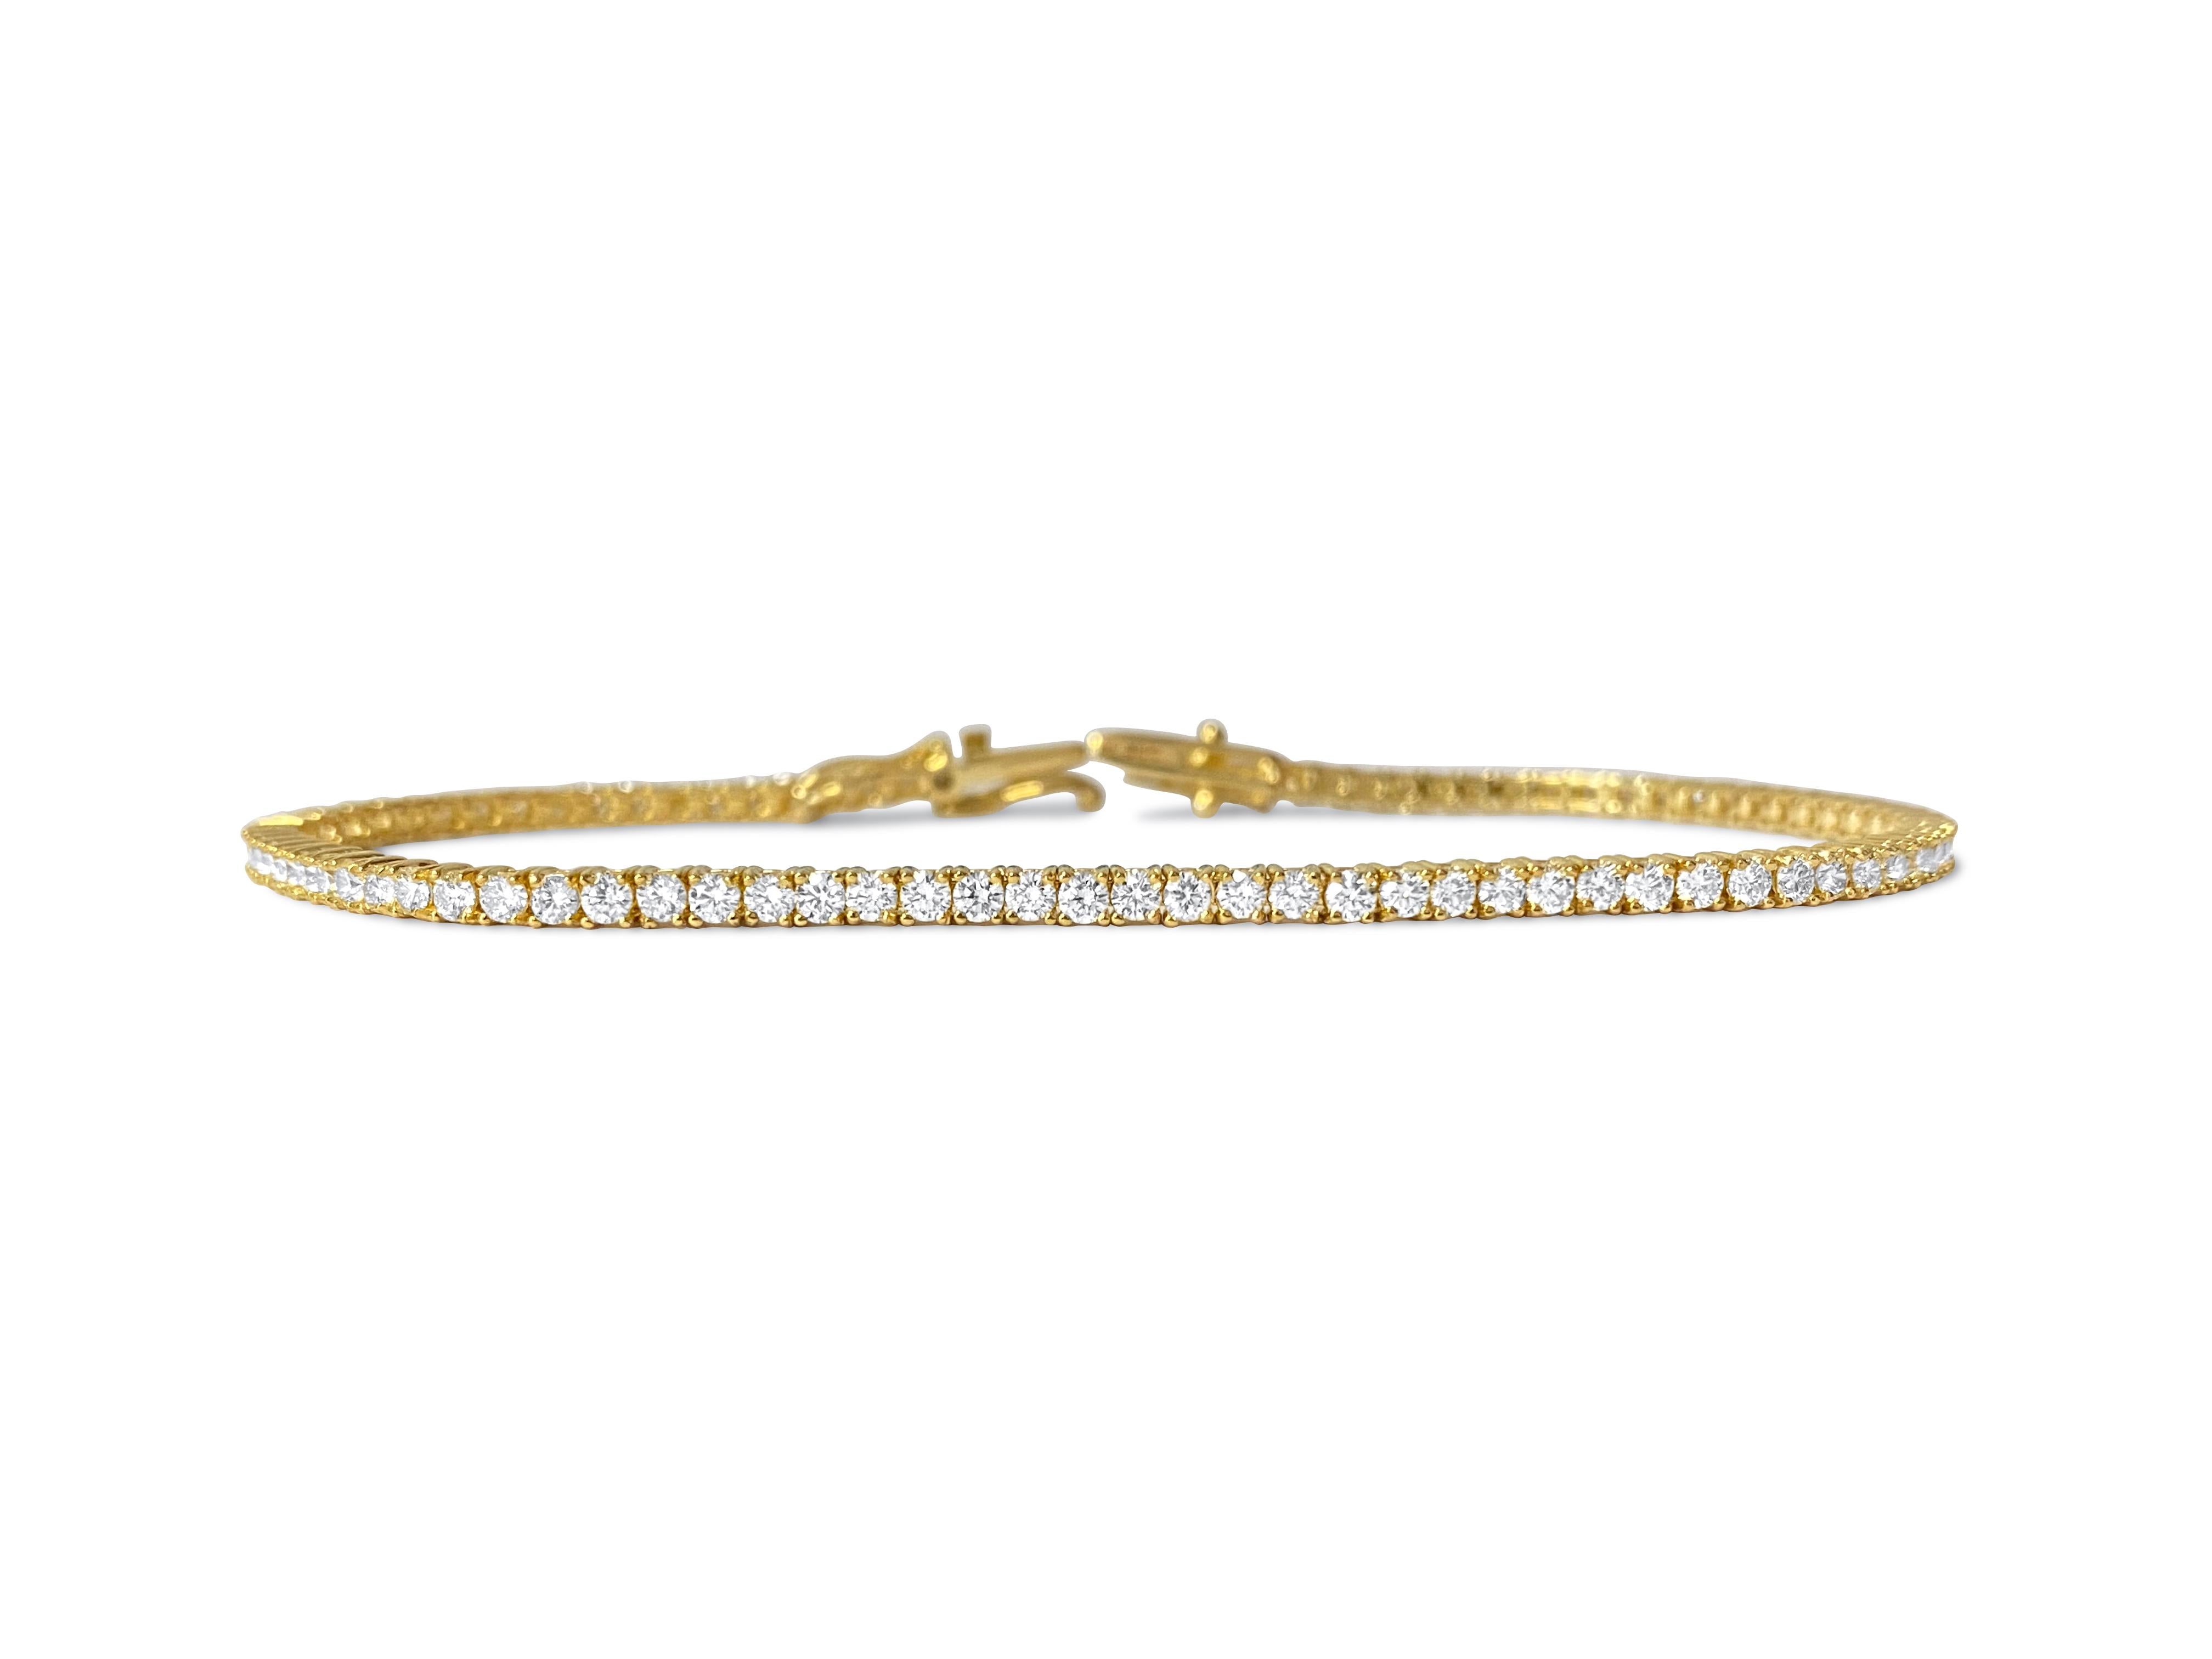 Material: The bracelet is made of 14-karat yellow gold. It has diamonds that weigh 3.08 carats in total. The diamonds are really clear (VVS-VS clarity) and have a color grade of H. They are all natural, mined from the earth. The diamonds are cut in